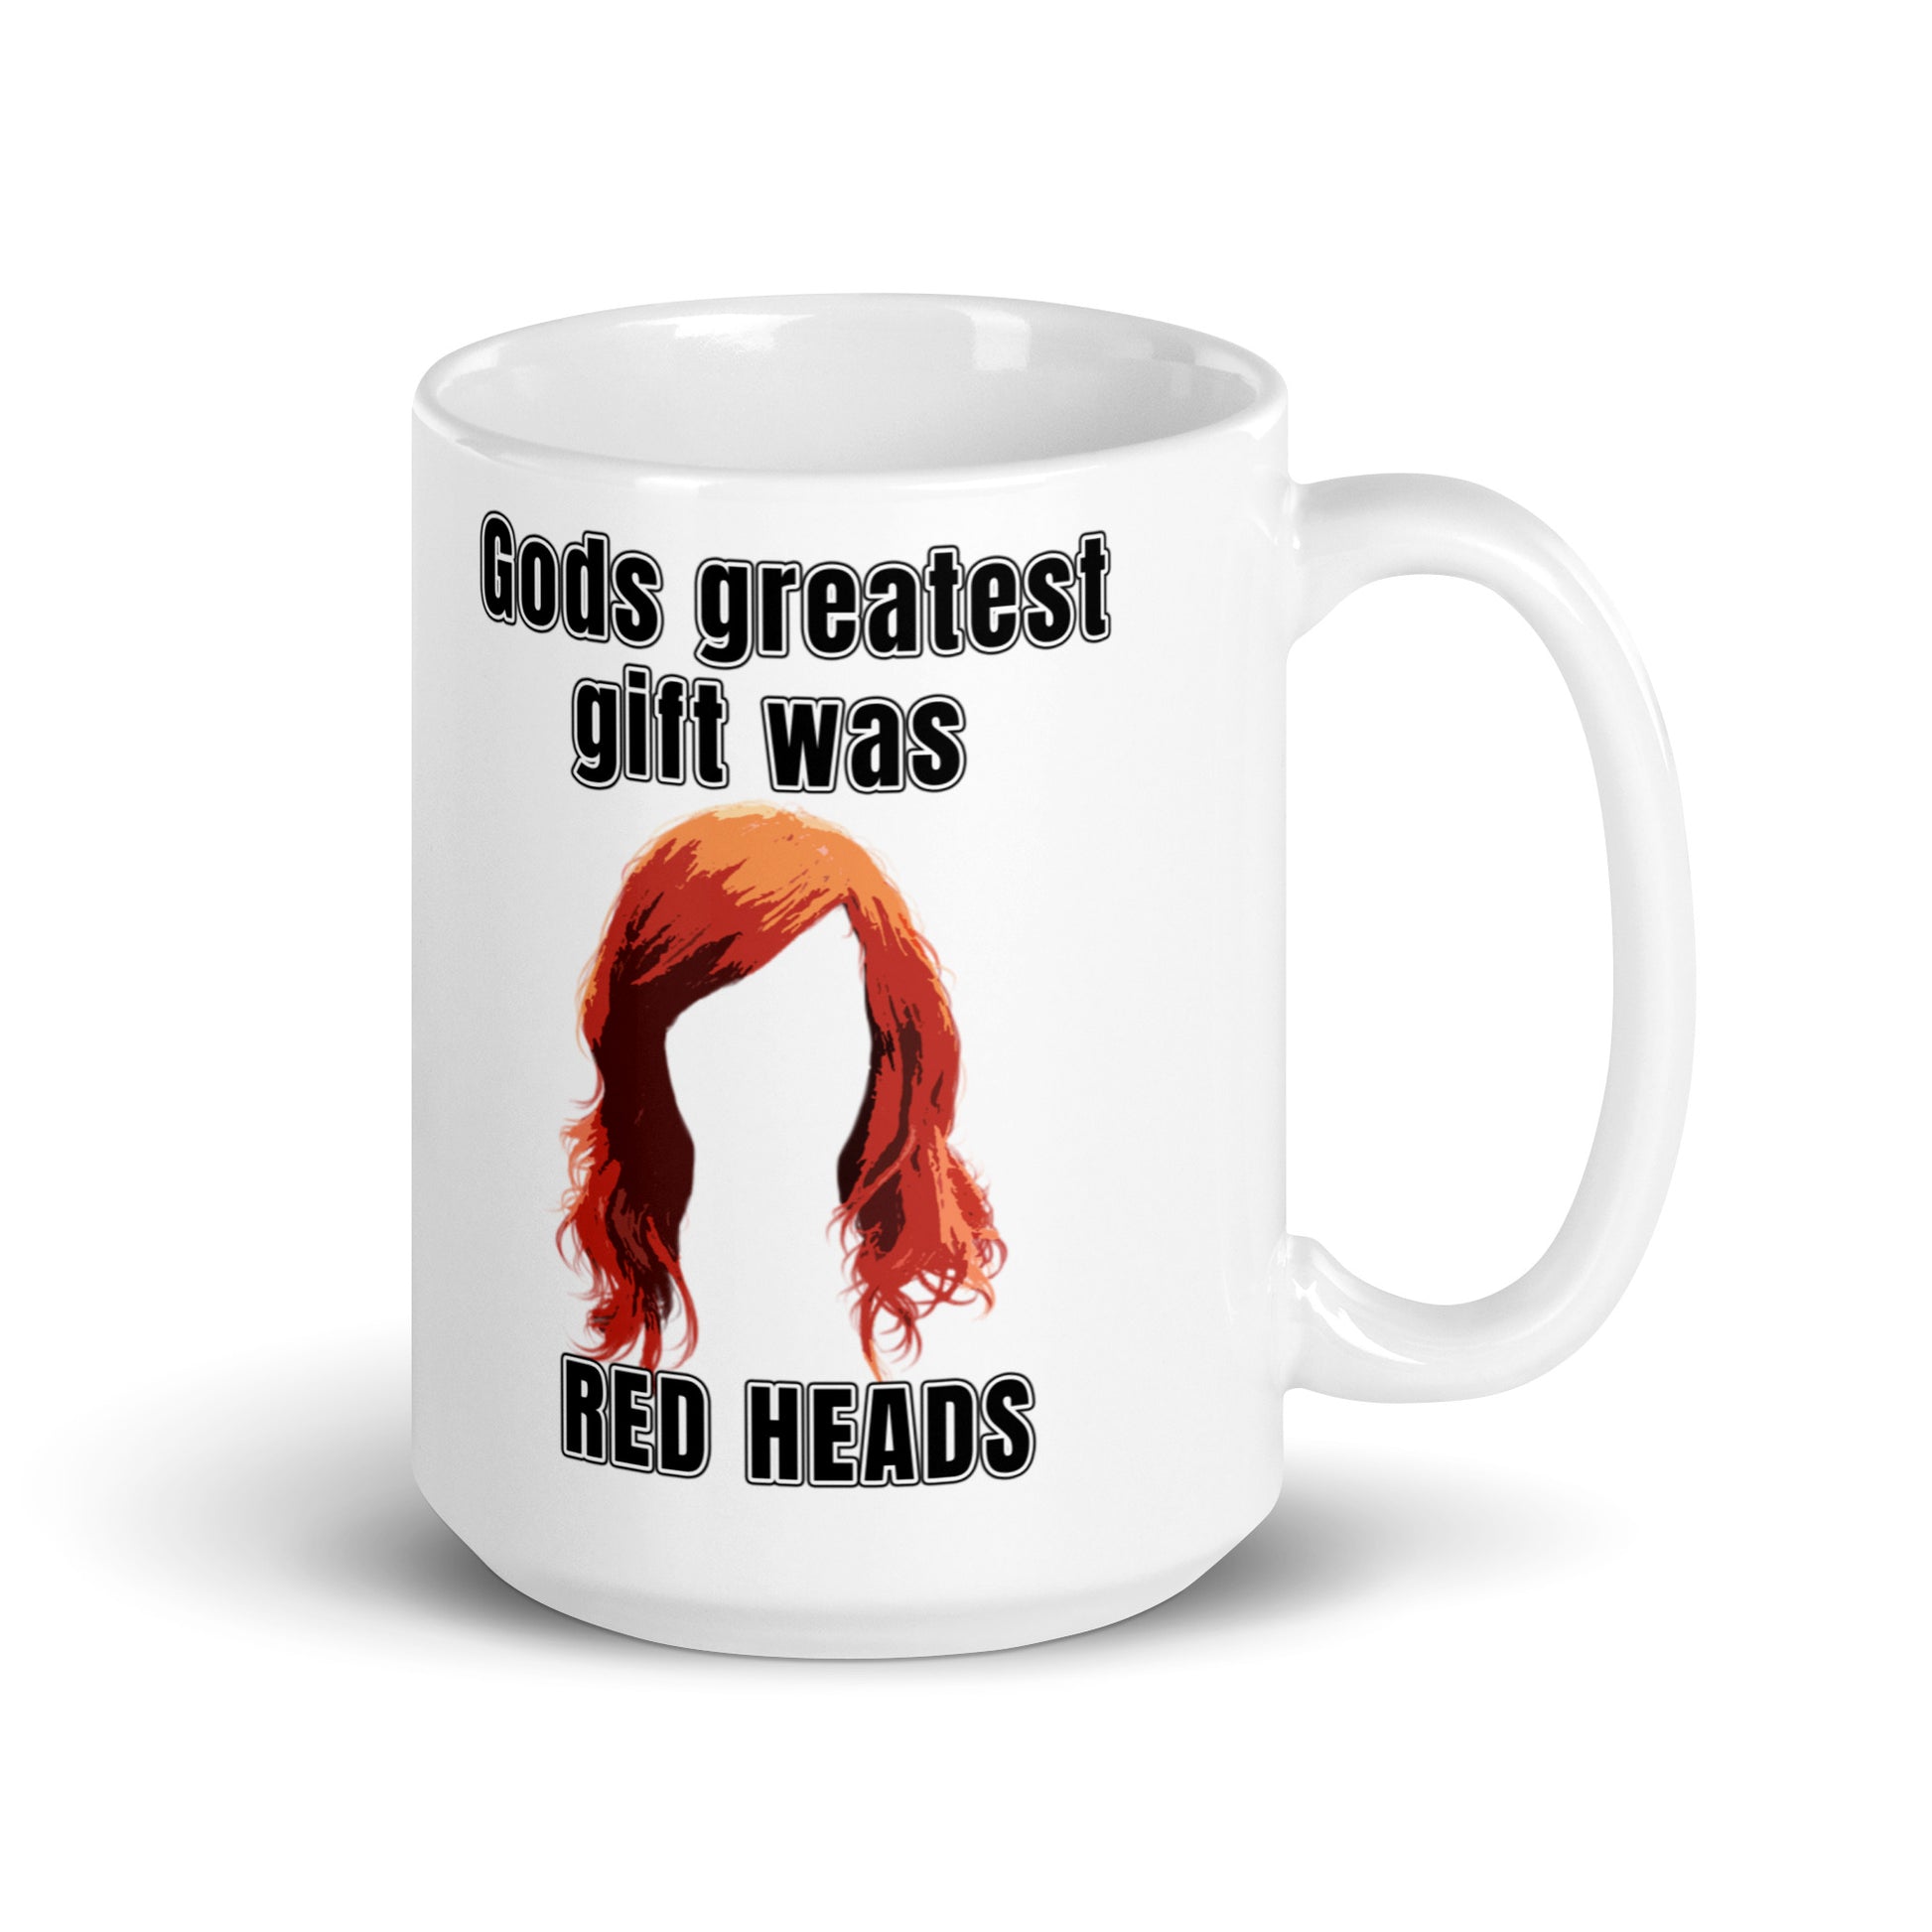 Gods greatest gift was RED HEADS - White glossy mug ginger god mothers day red hair red head